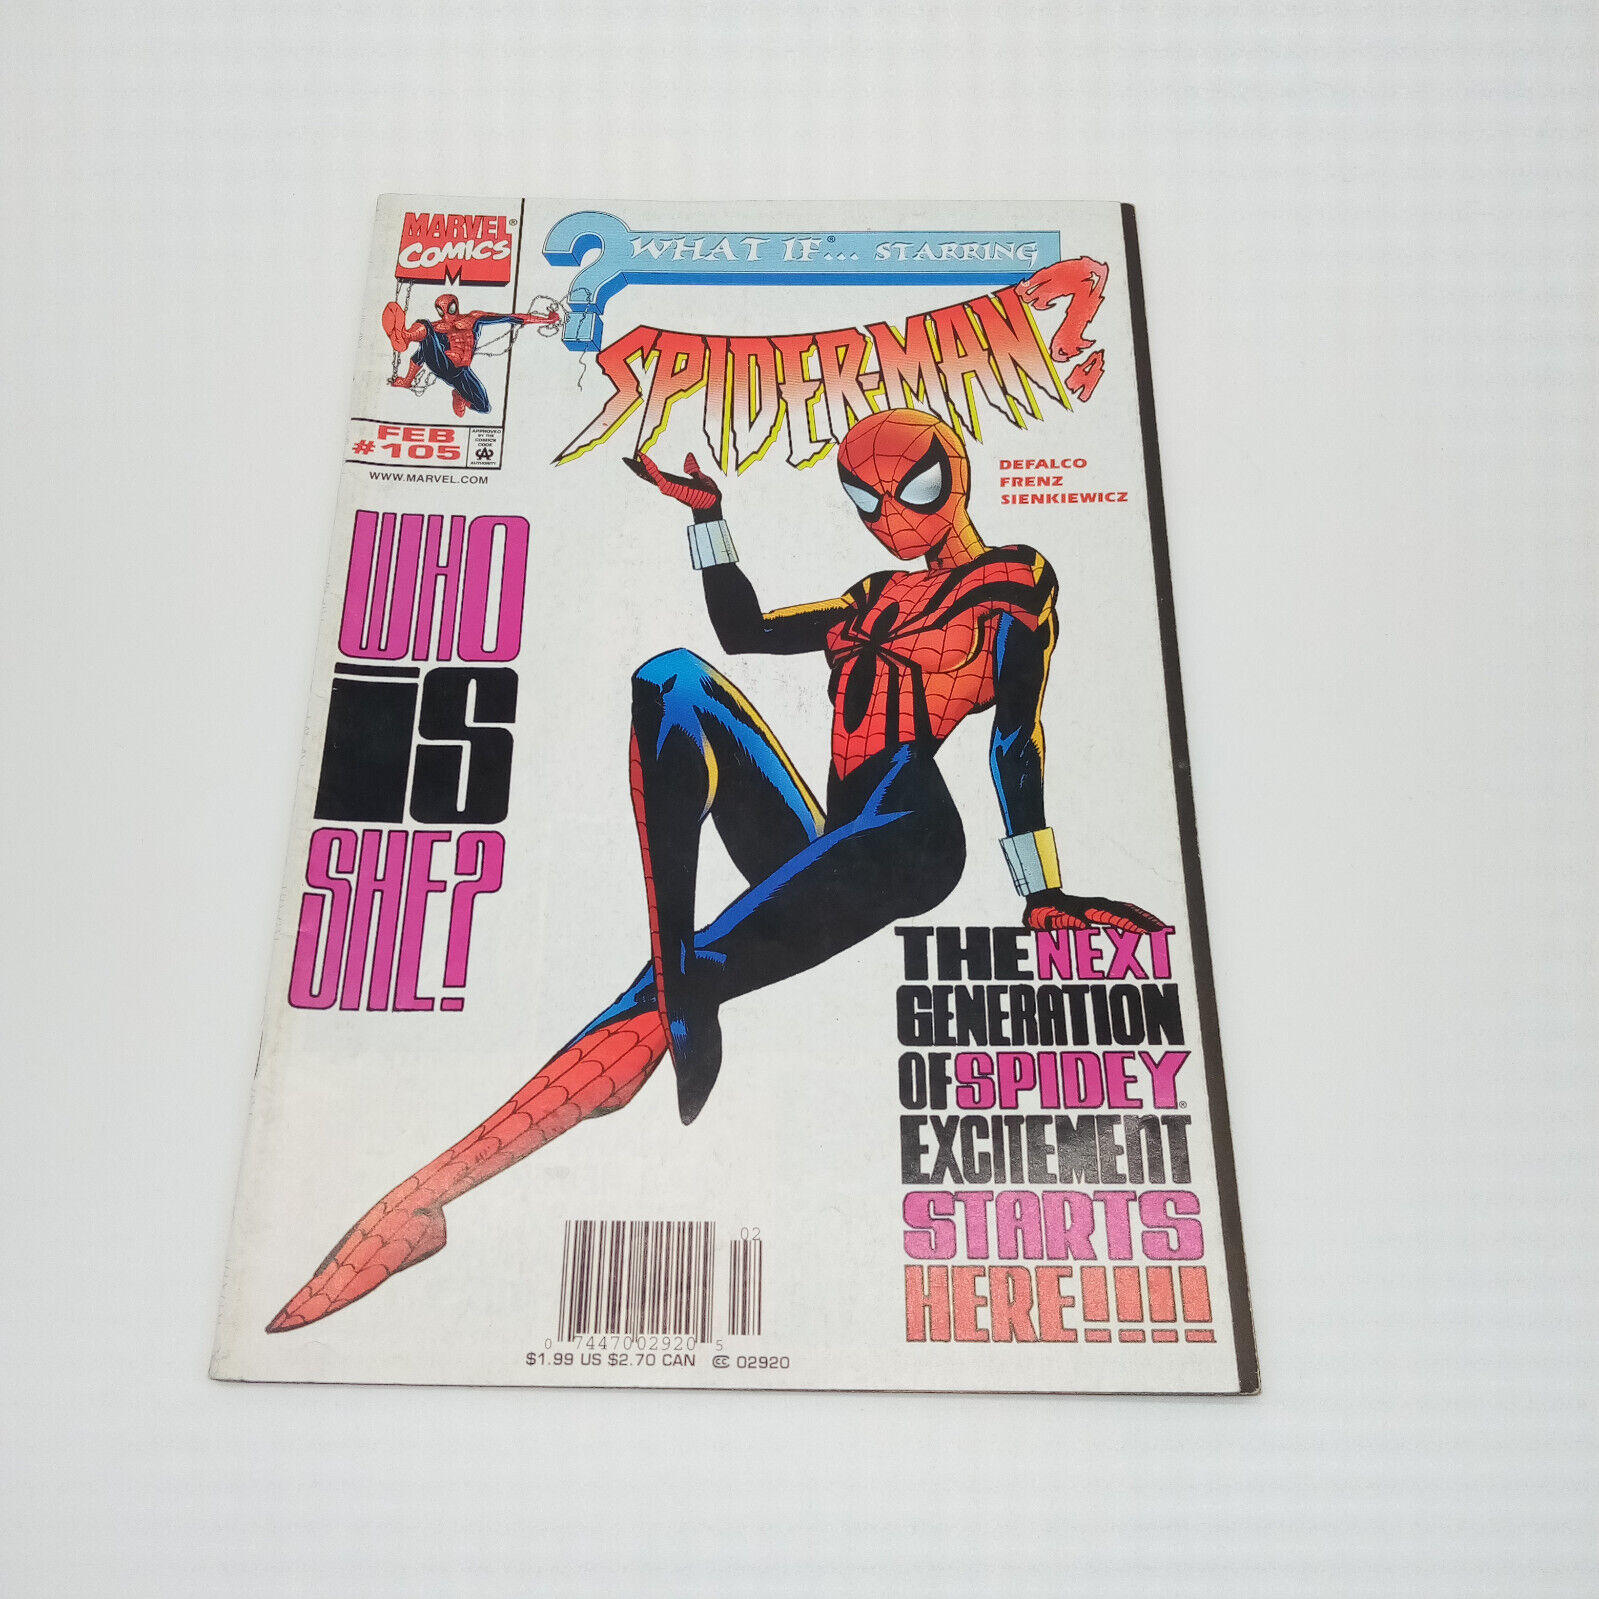 What If....Starring Spider-Man? Feb # 105 Spider-Girl, Who is She?